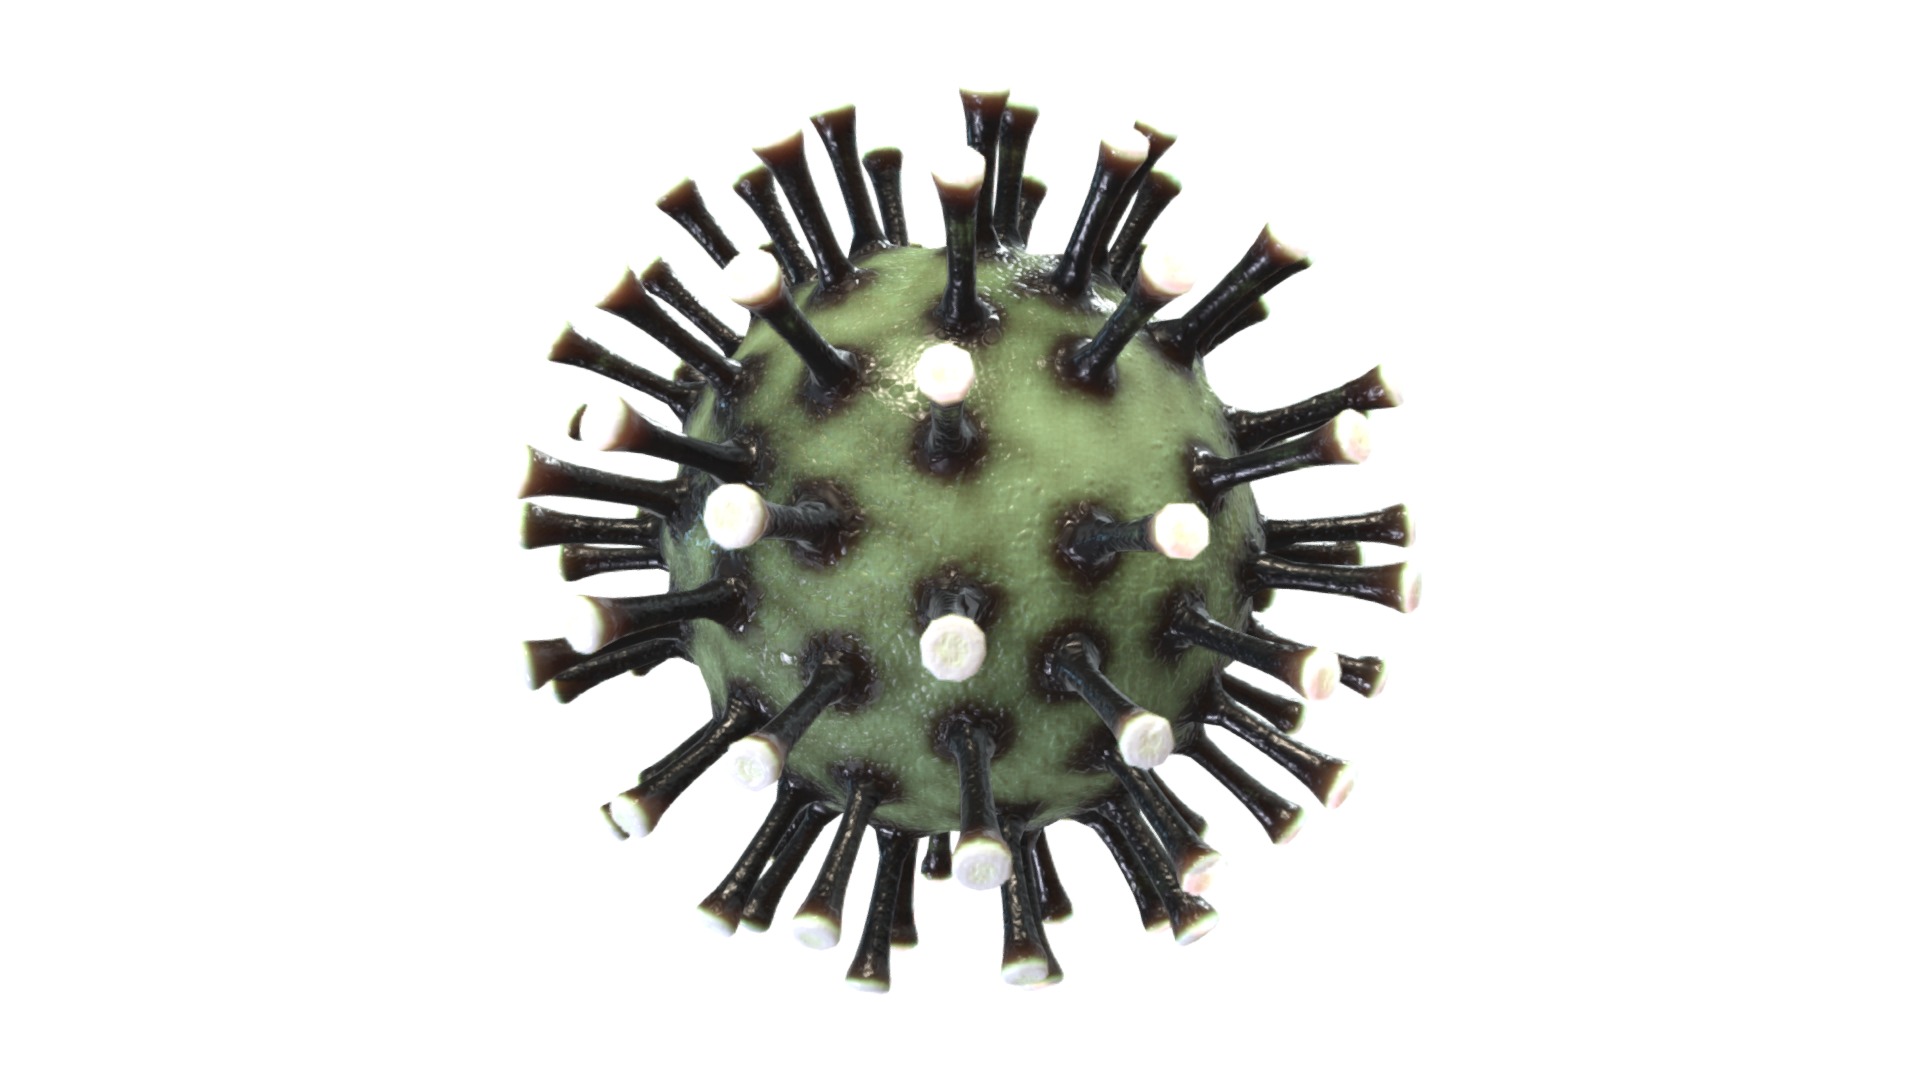 3D model Corona Virus Covid 19 - This is a 3D model of the Corona Virus Covid 19. The 3D model is about a green and black puzzle.